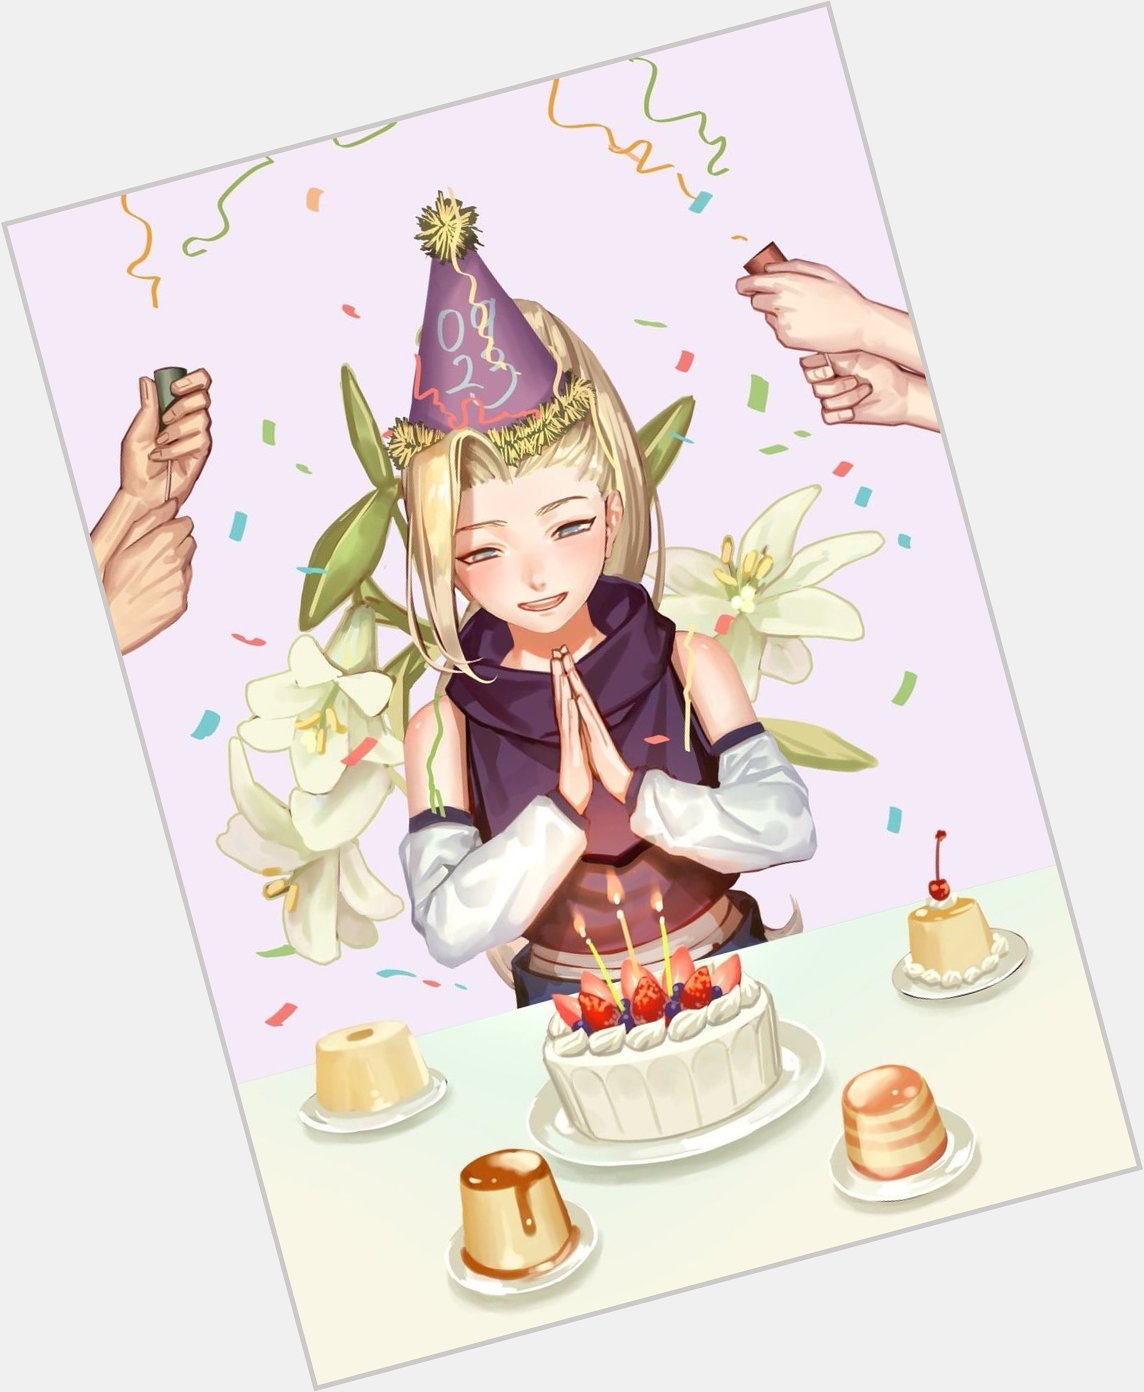 Happy birthday to Ino Yamanaka (23/9) from the anime Naruto!

Credit of the pics goes to the artists! 